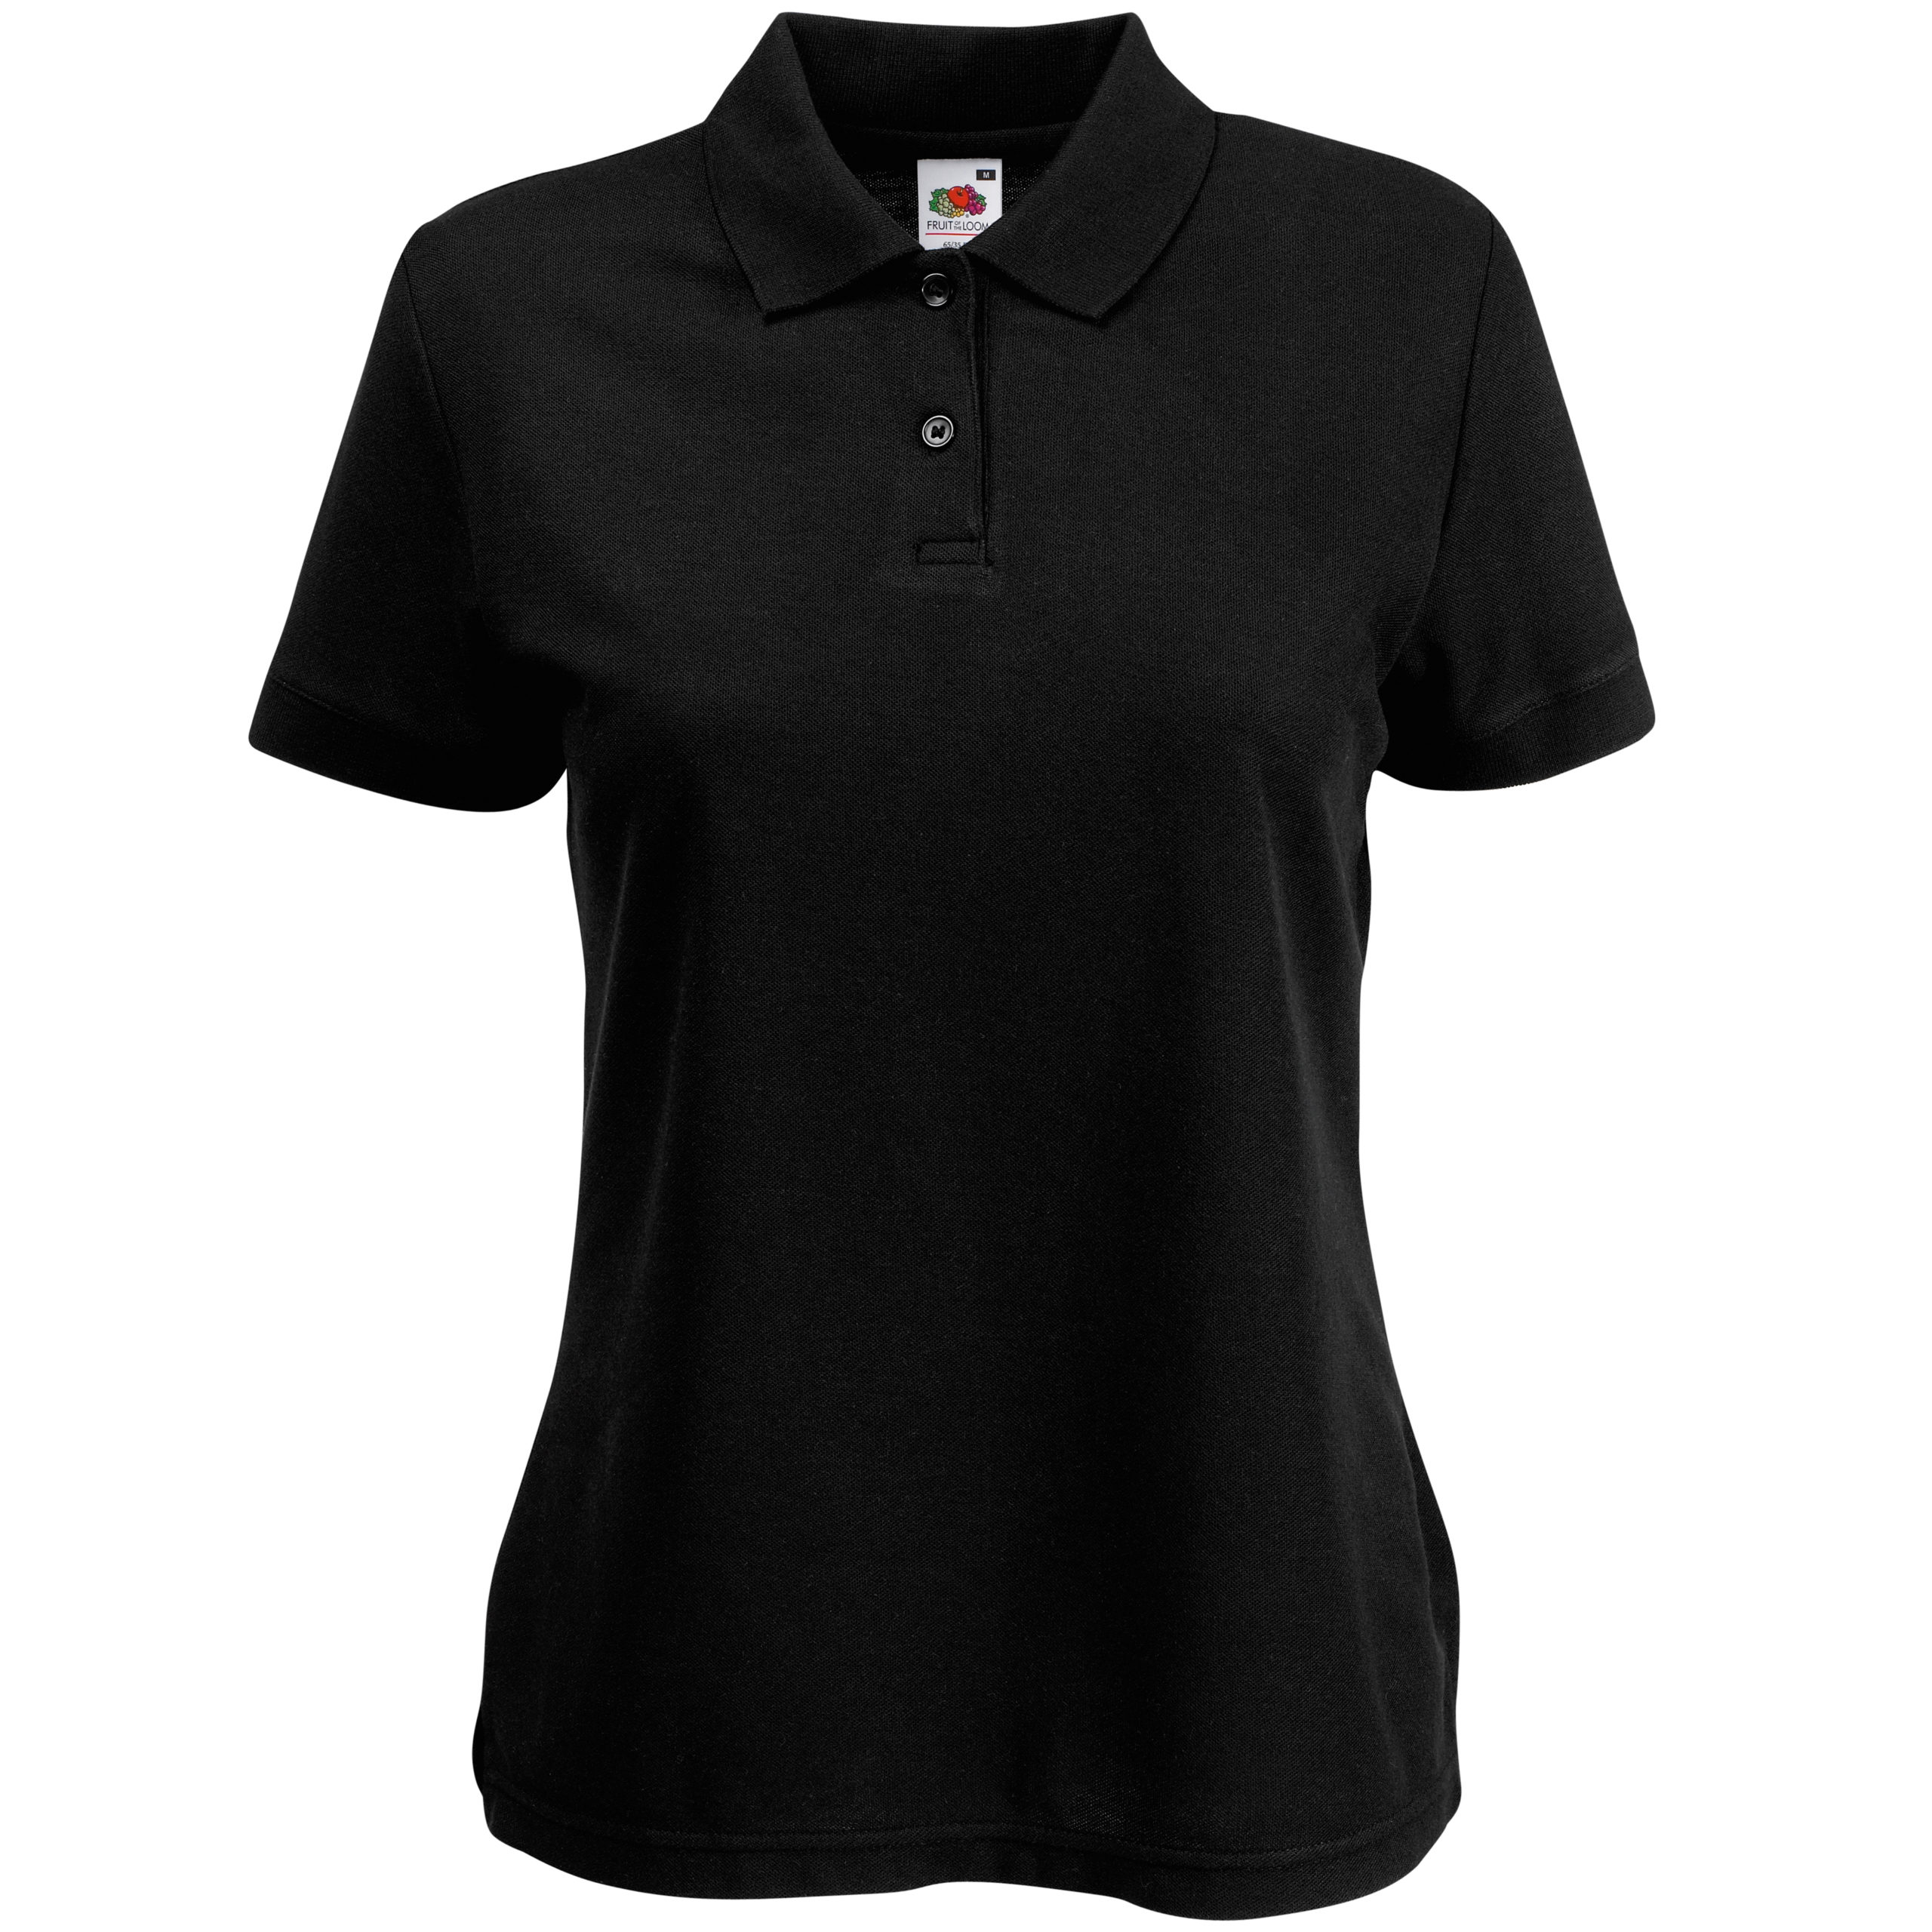 fruit of the loom women's polo shirts